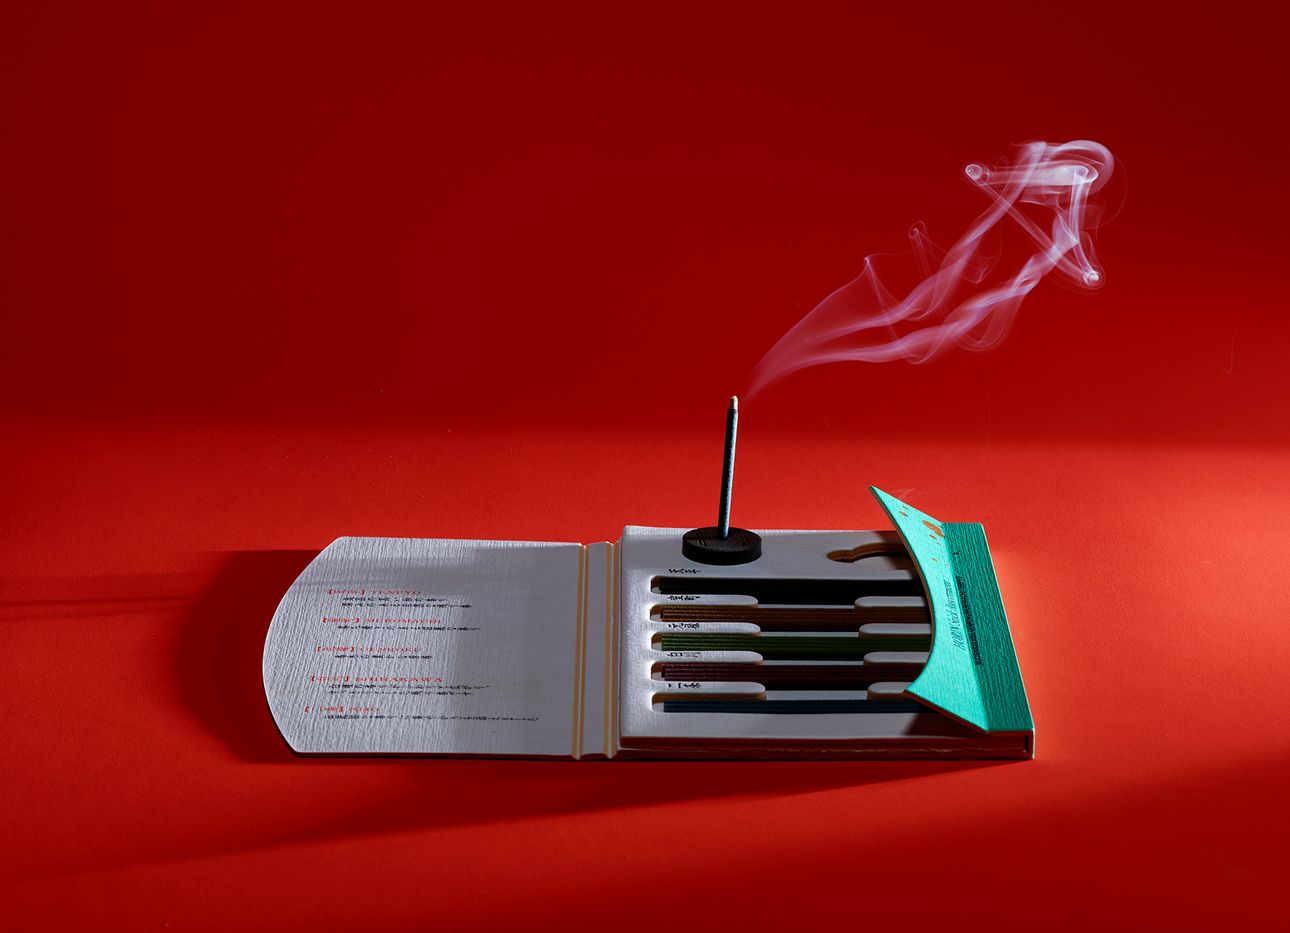 Incense burning on a pack of sticks on a red background.